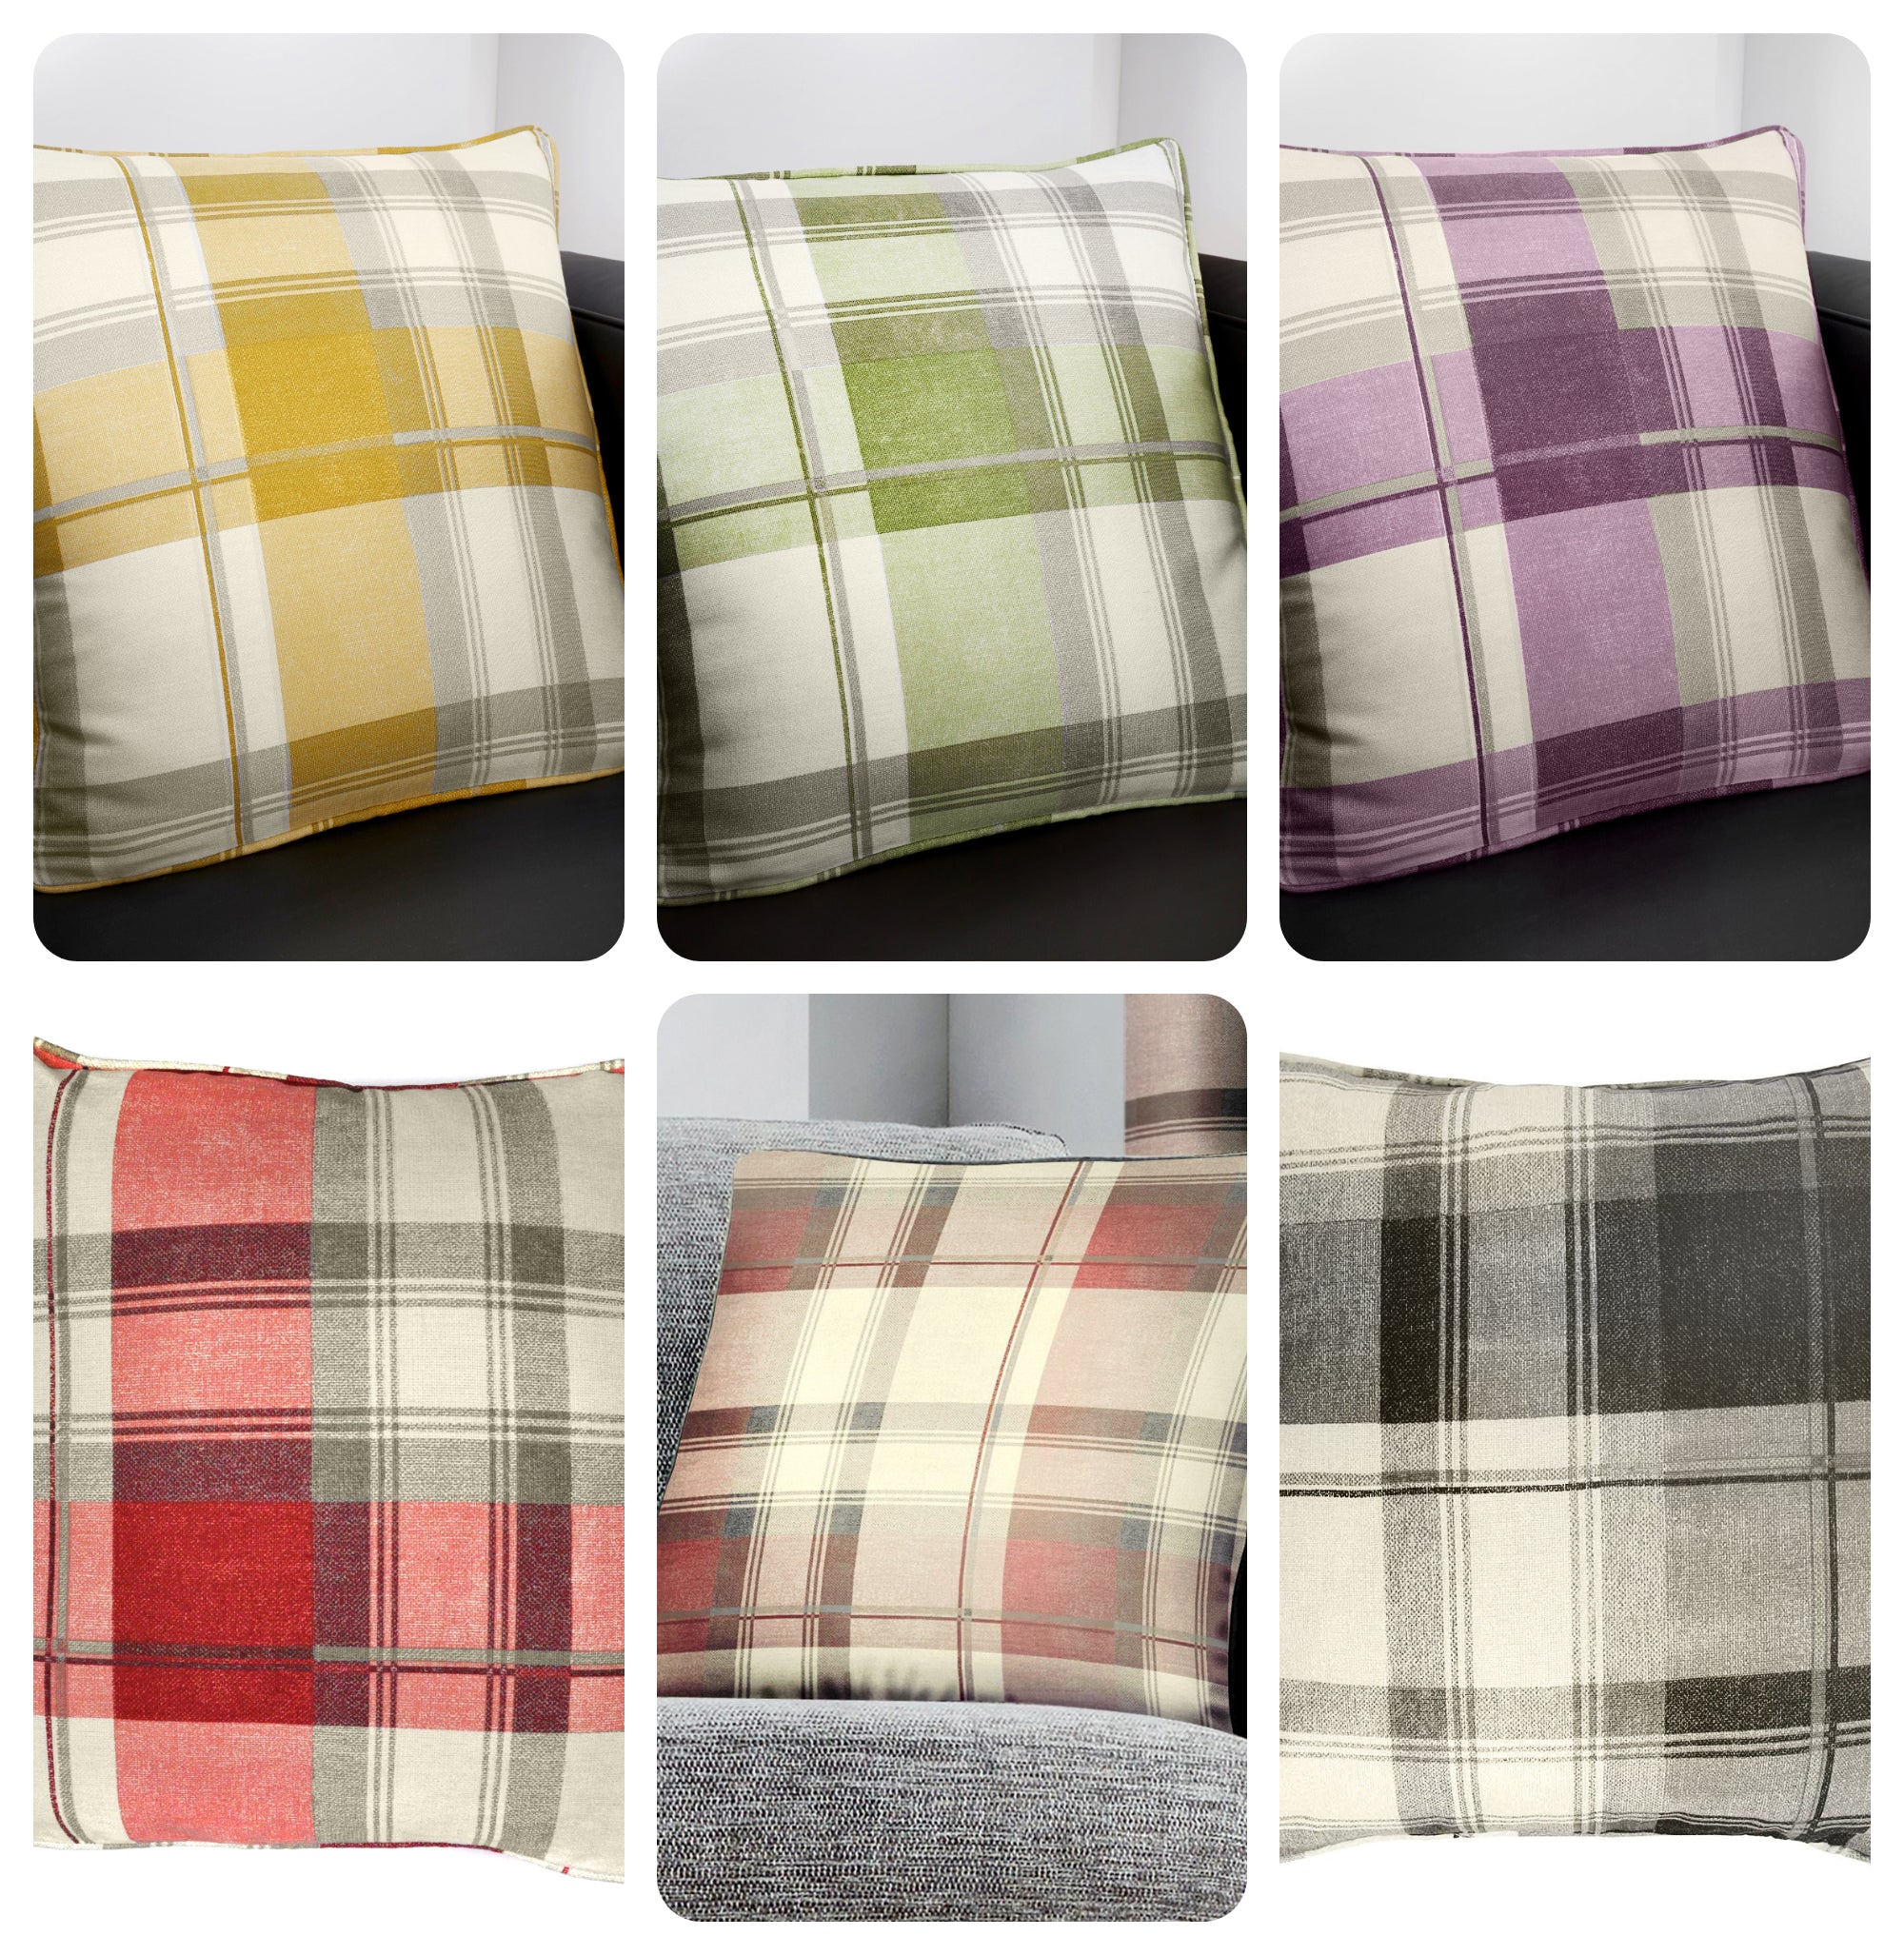 Balmoral Check - Filled Square Cushion - by Fusion